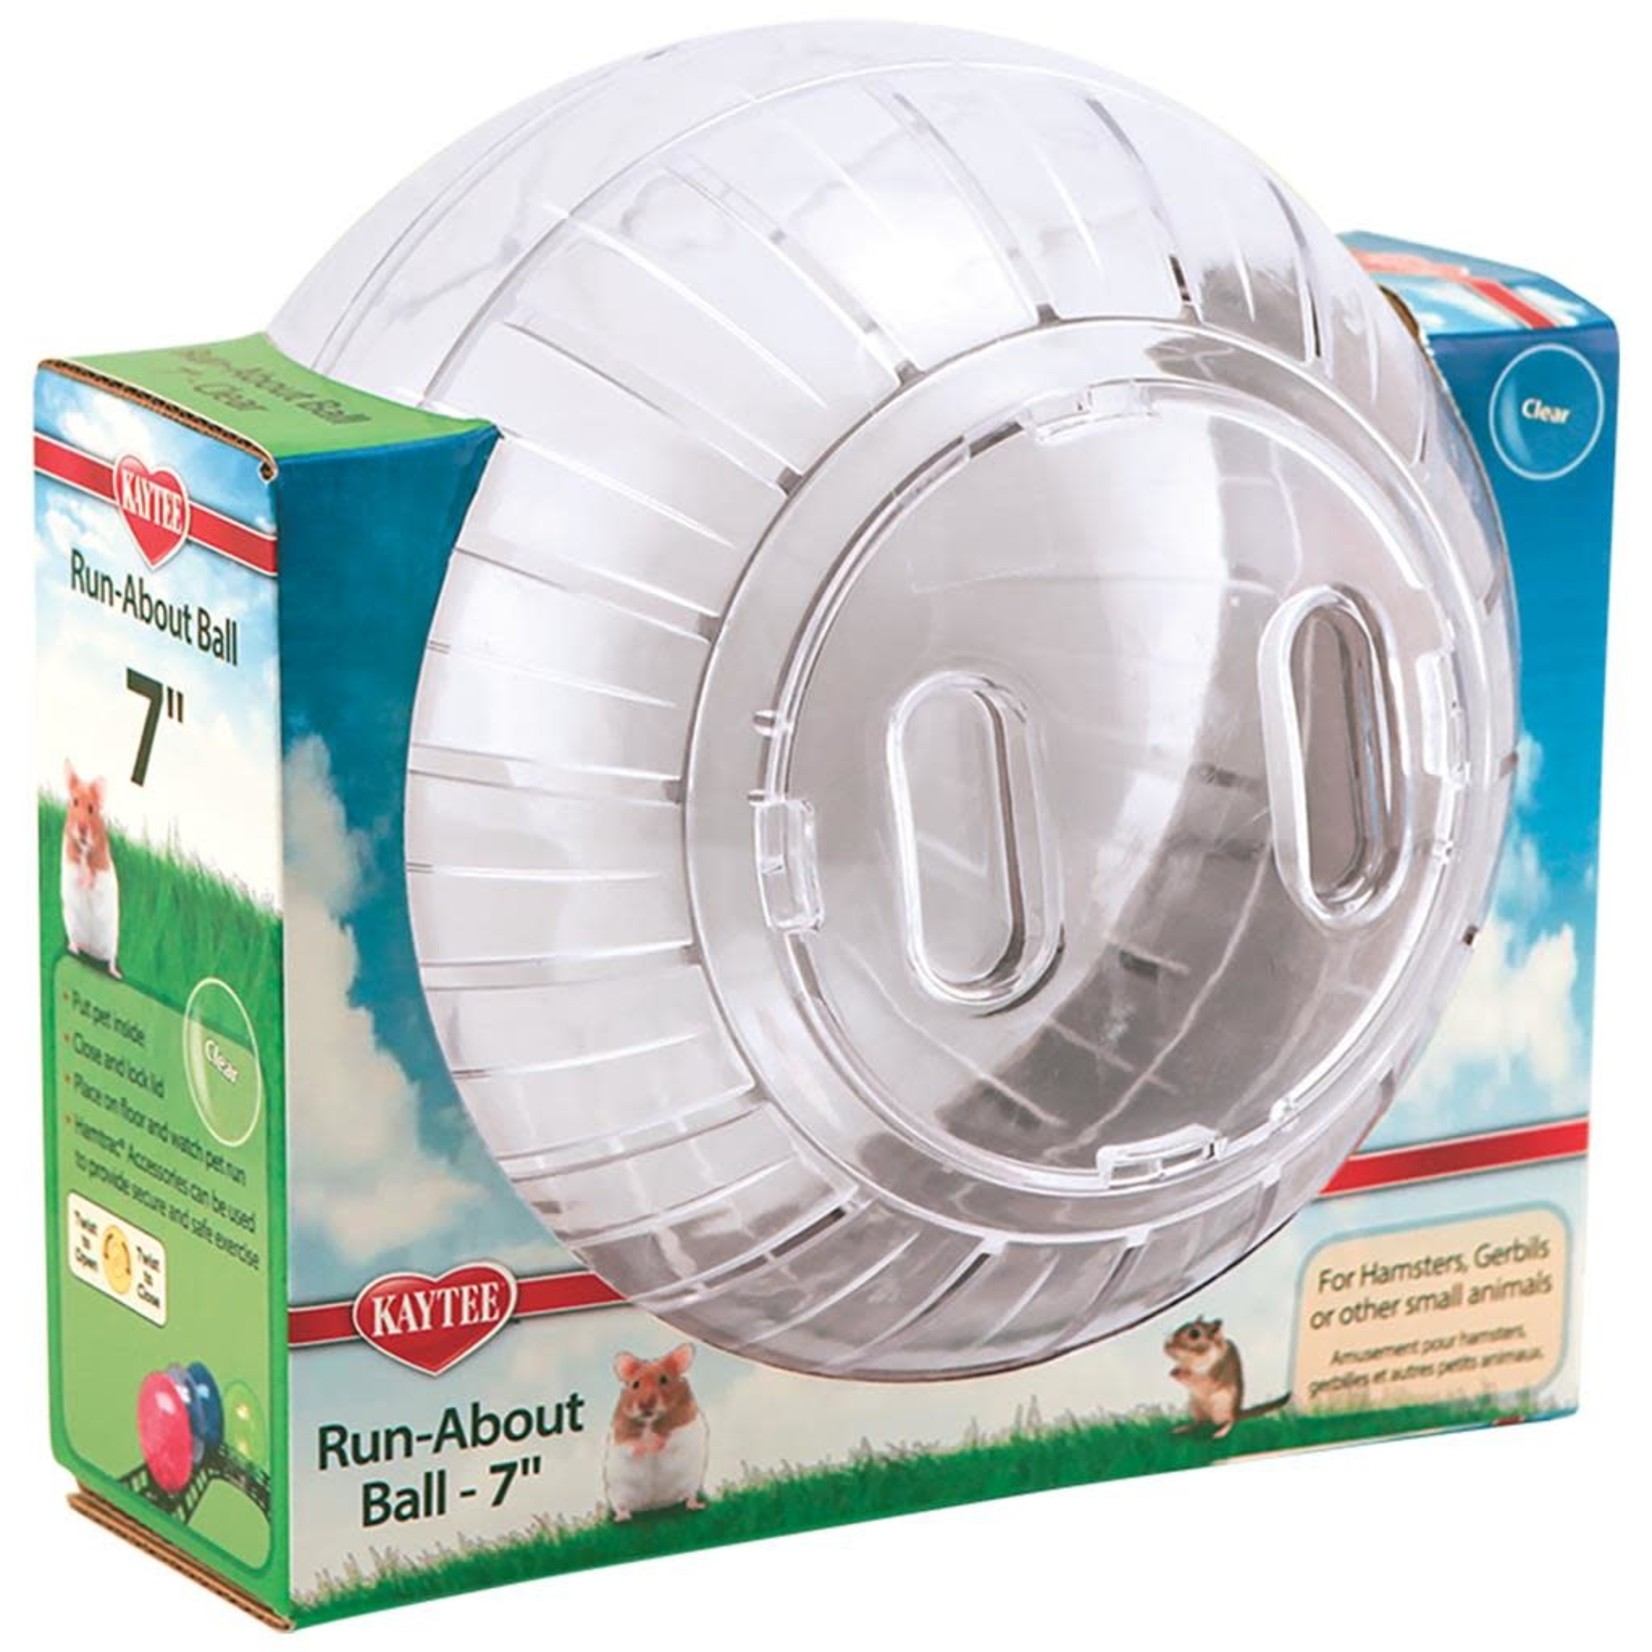 KAYTEE PRODUCTS INC KAYTEE RUN-ABOUT BALL - CLEAR 7in